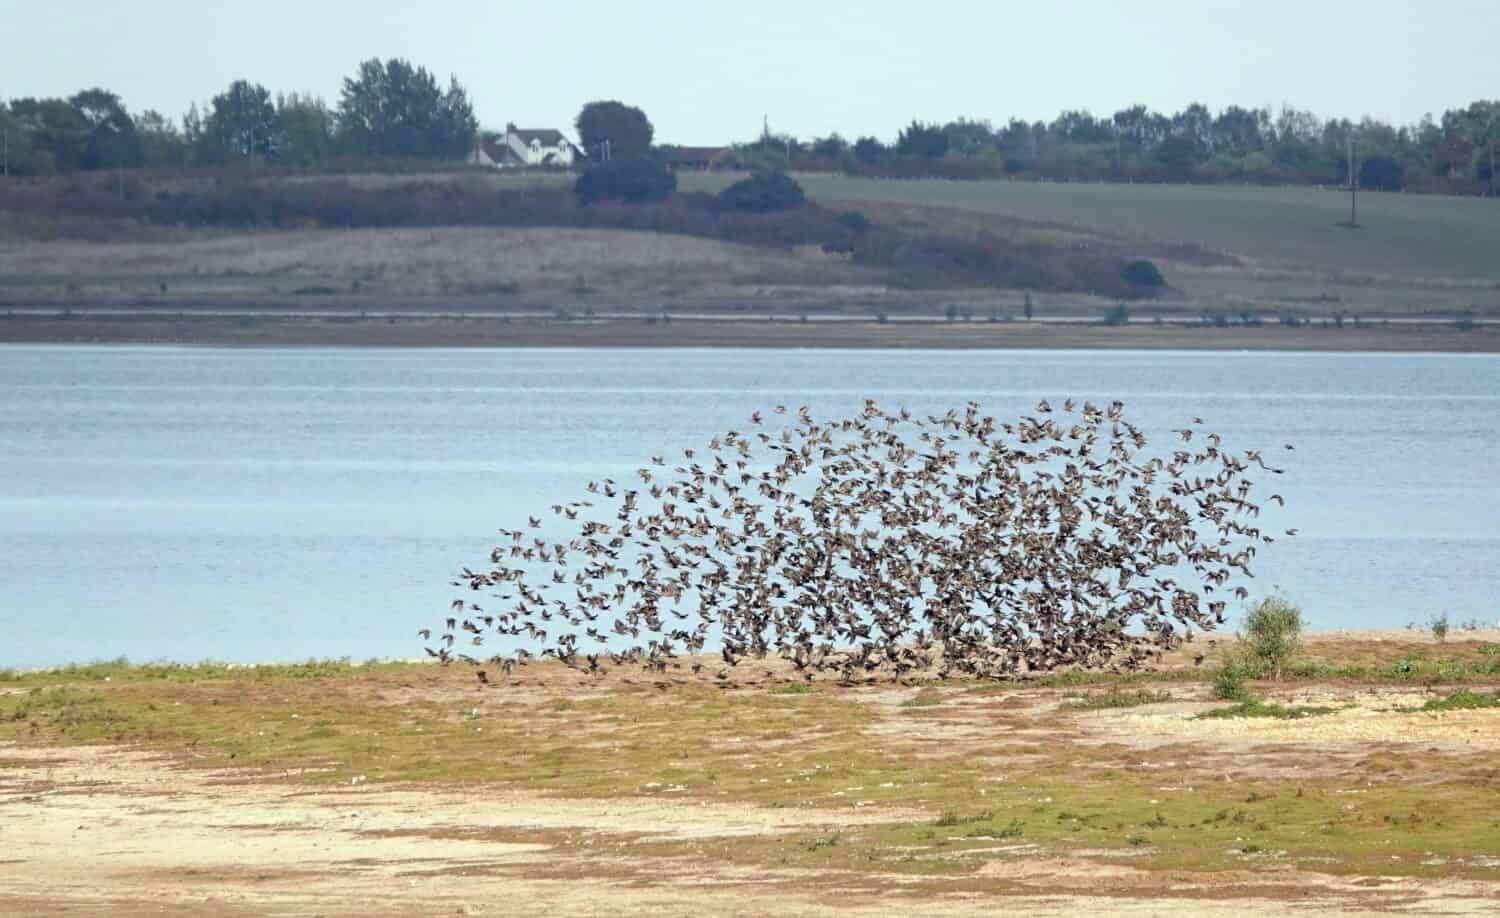 A small murmuration of starling birds on the water’s edge at Abberton Reservoir, Essex, UK.